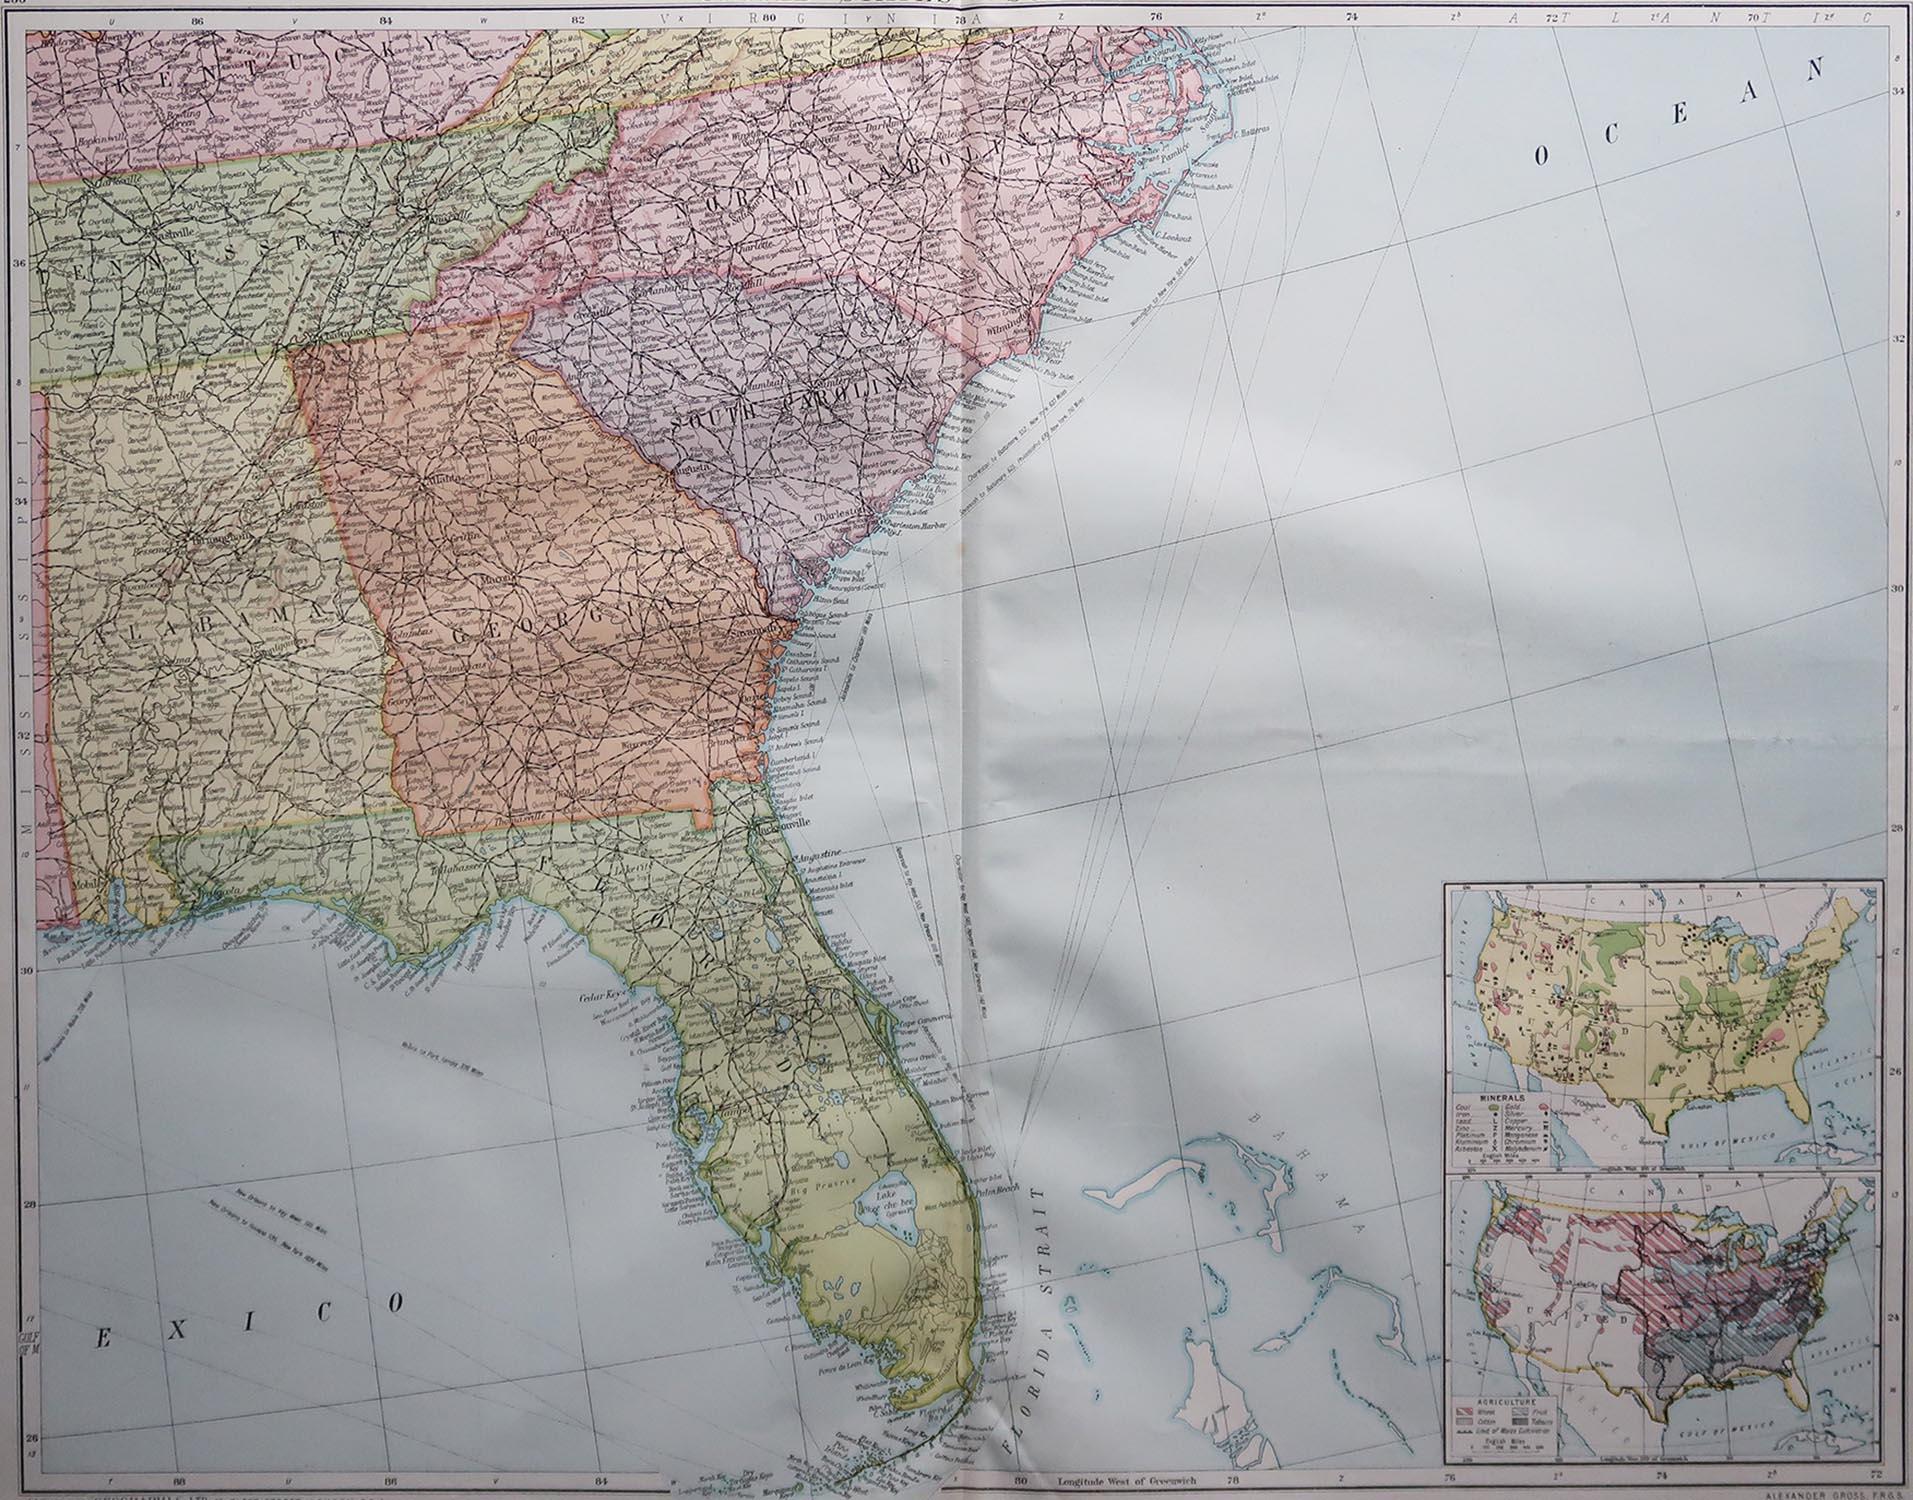 Great map of The South Eastern States

Original color. Good condition

Published by Alexander Gross

Unframed.








